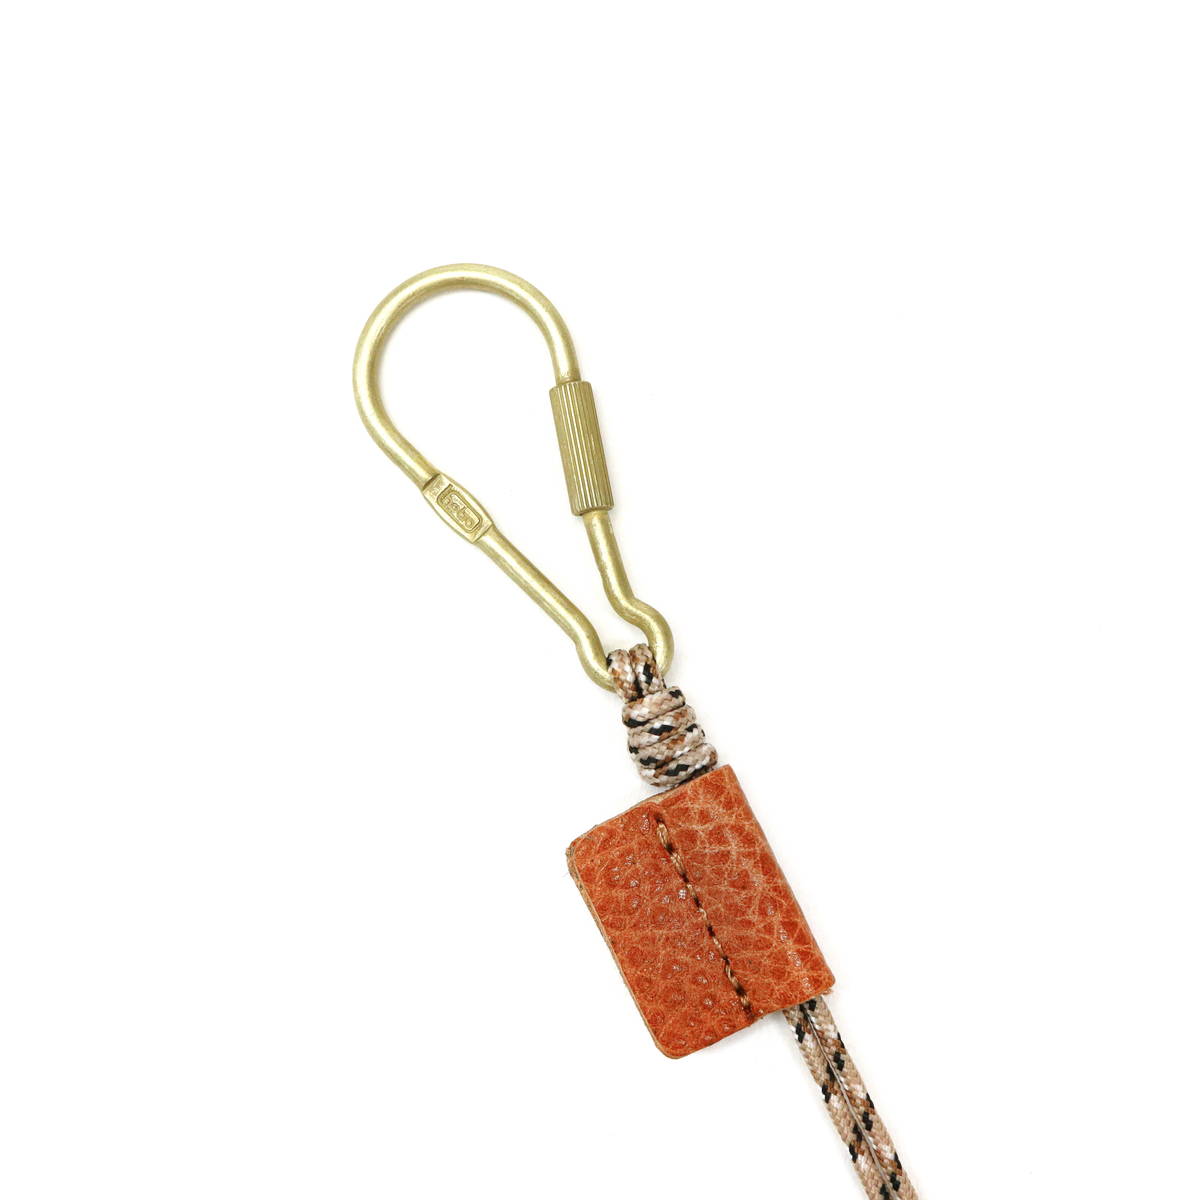 hobo ホーボー BRASS CARABINER KEY RING with NYLON CORD HB-A3106 